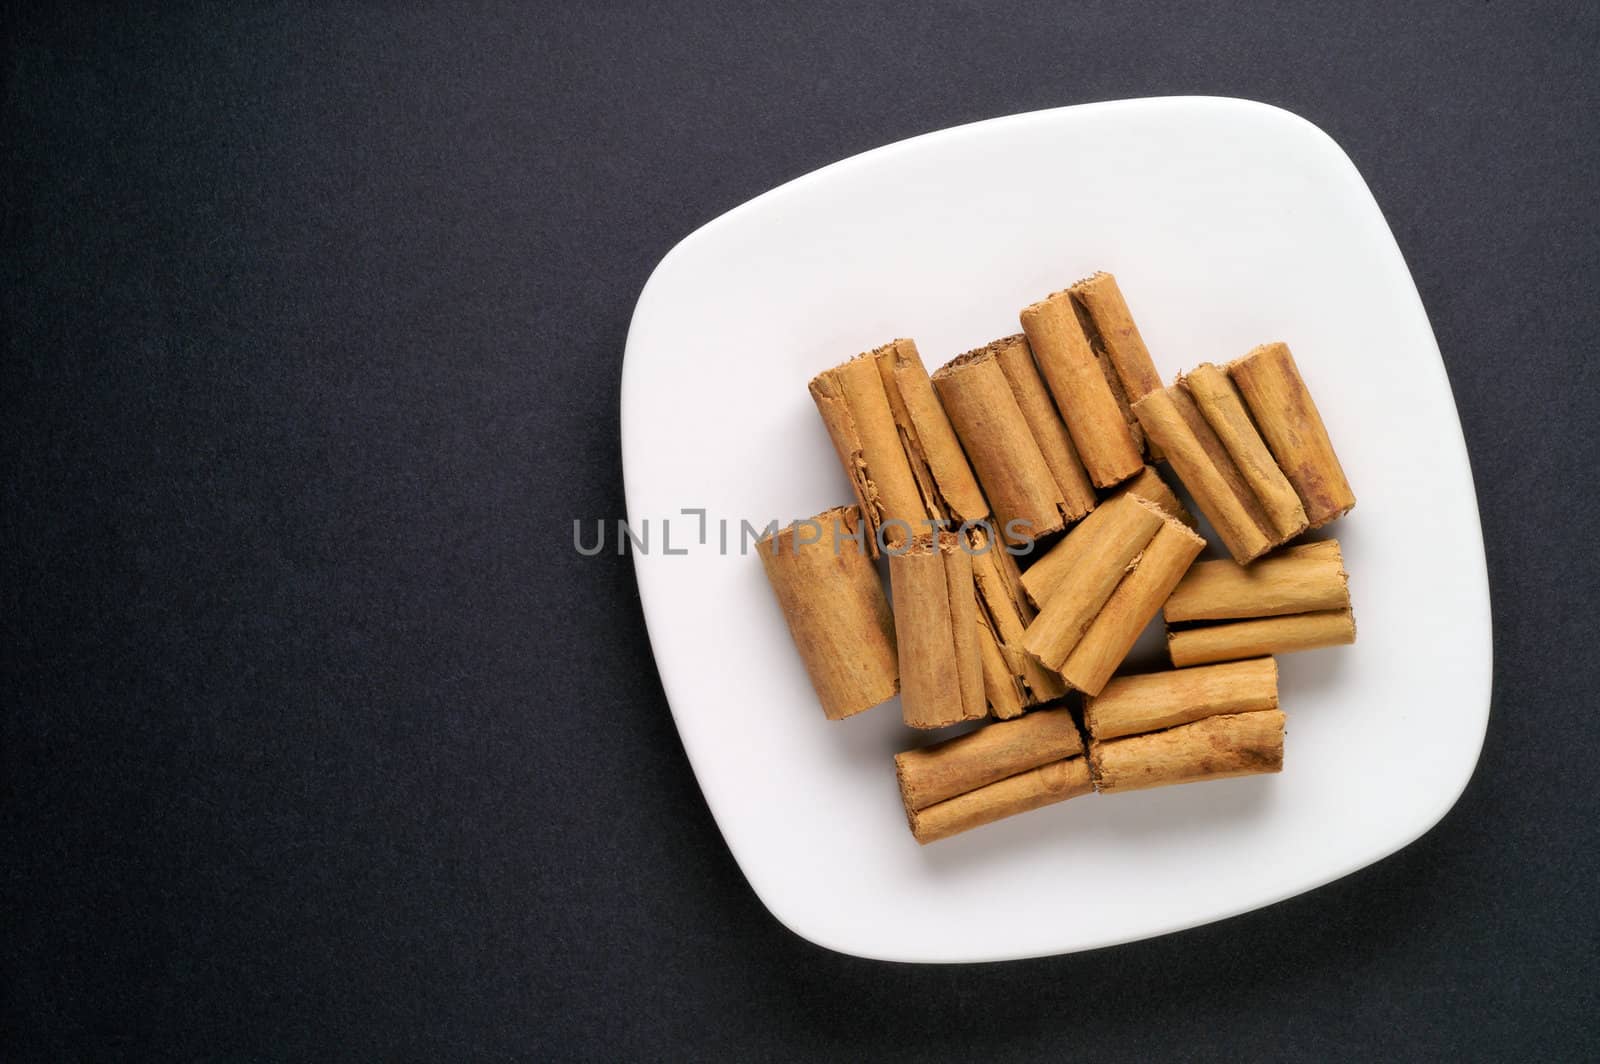 Cinnamon in a dish by Laborer